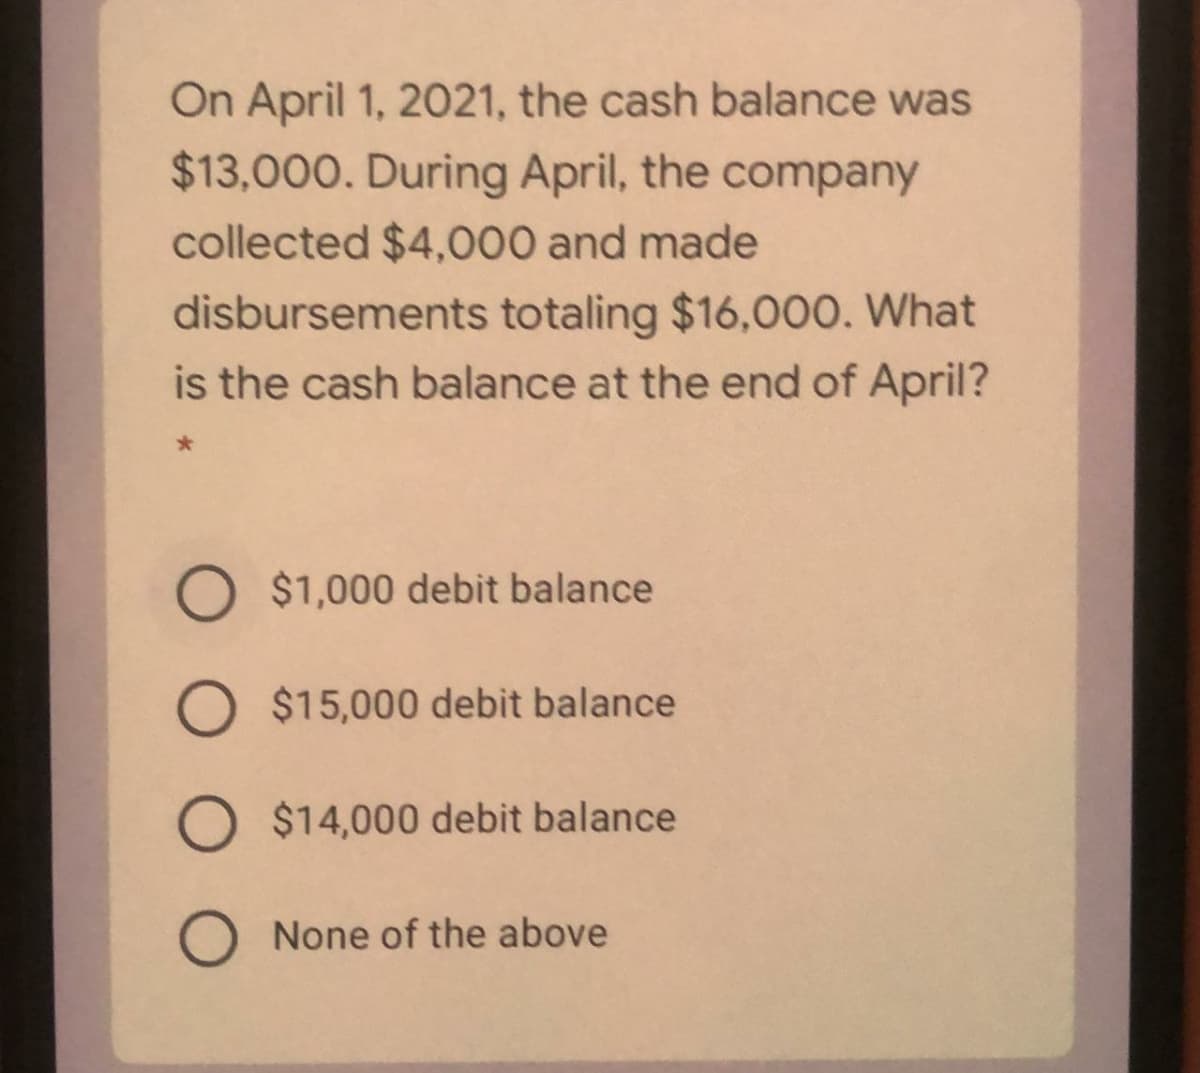 On April 1, 2021, the cash balance was
$13,000. During April, the company
collected $4,000 and made
disbursements totaling $16,00O. What
is the cash balance at the end of April?
O $1,000 debit balance
O $15,000 debit balance
O $14,000 debit balance
O None of the above
